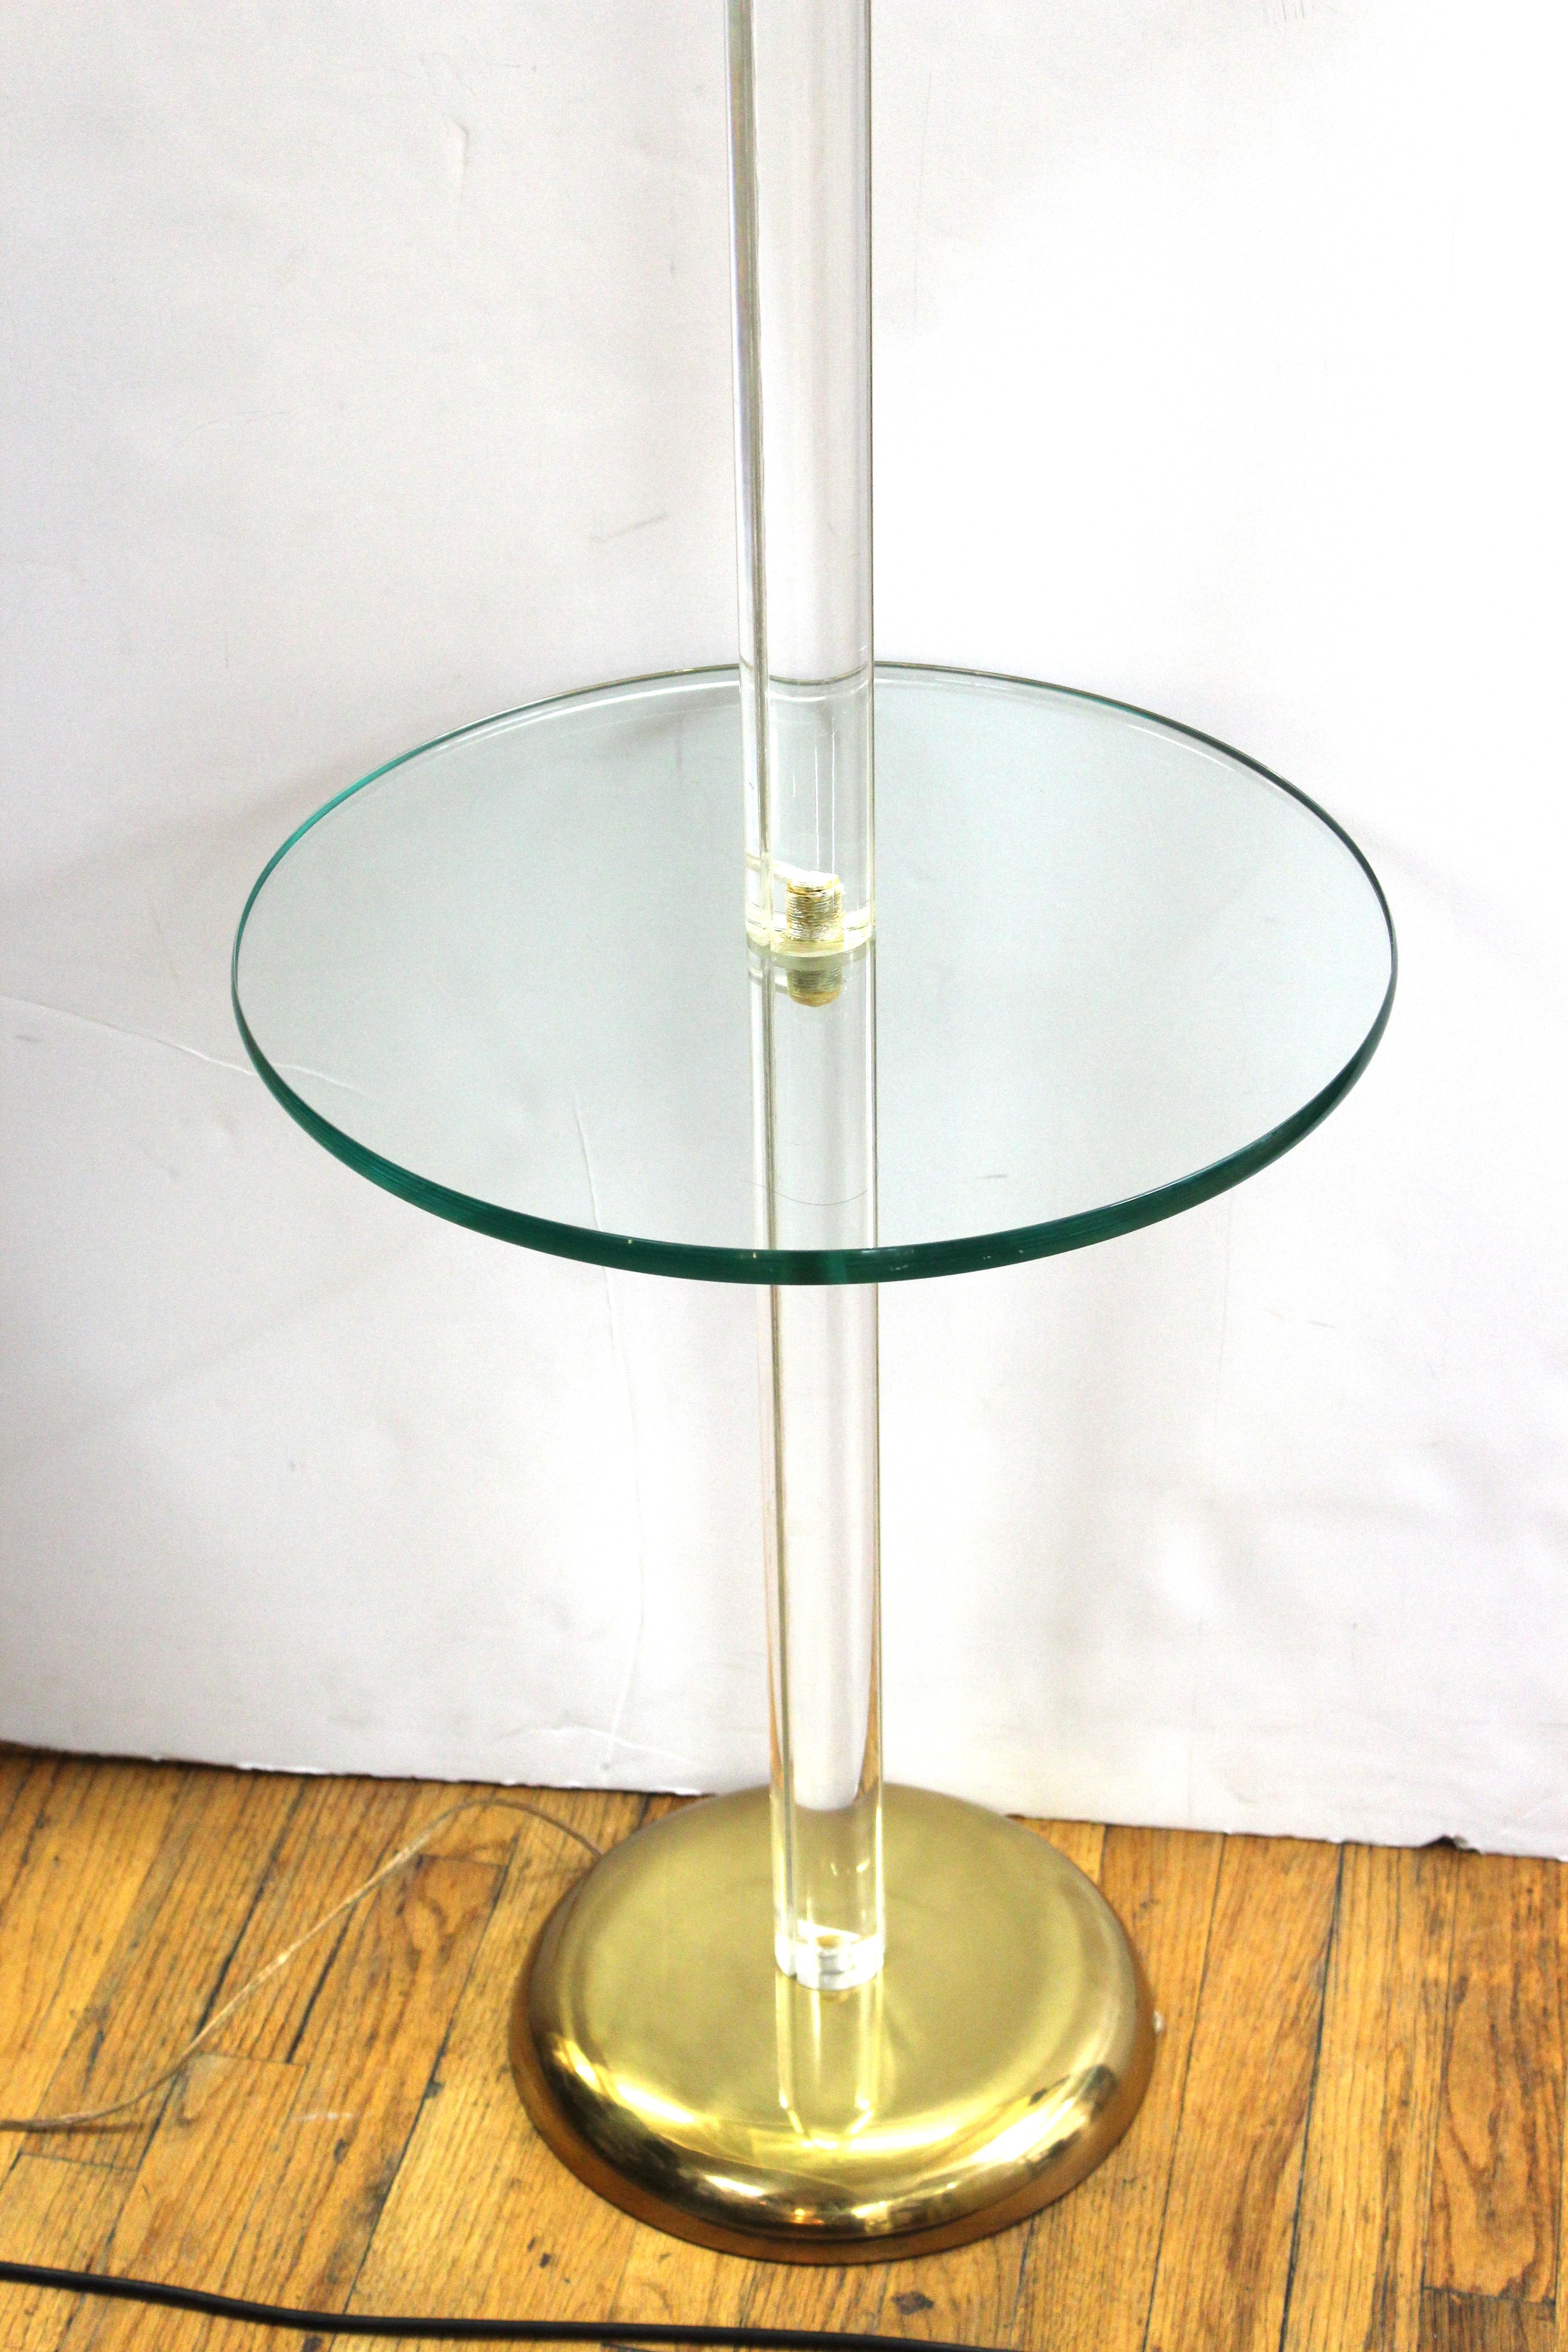 20th Century Modern Floor Lamp & Side Table in Glass, Lucite & Brass attrib. to Karl Springer For Sale